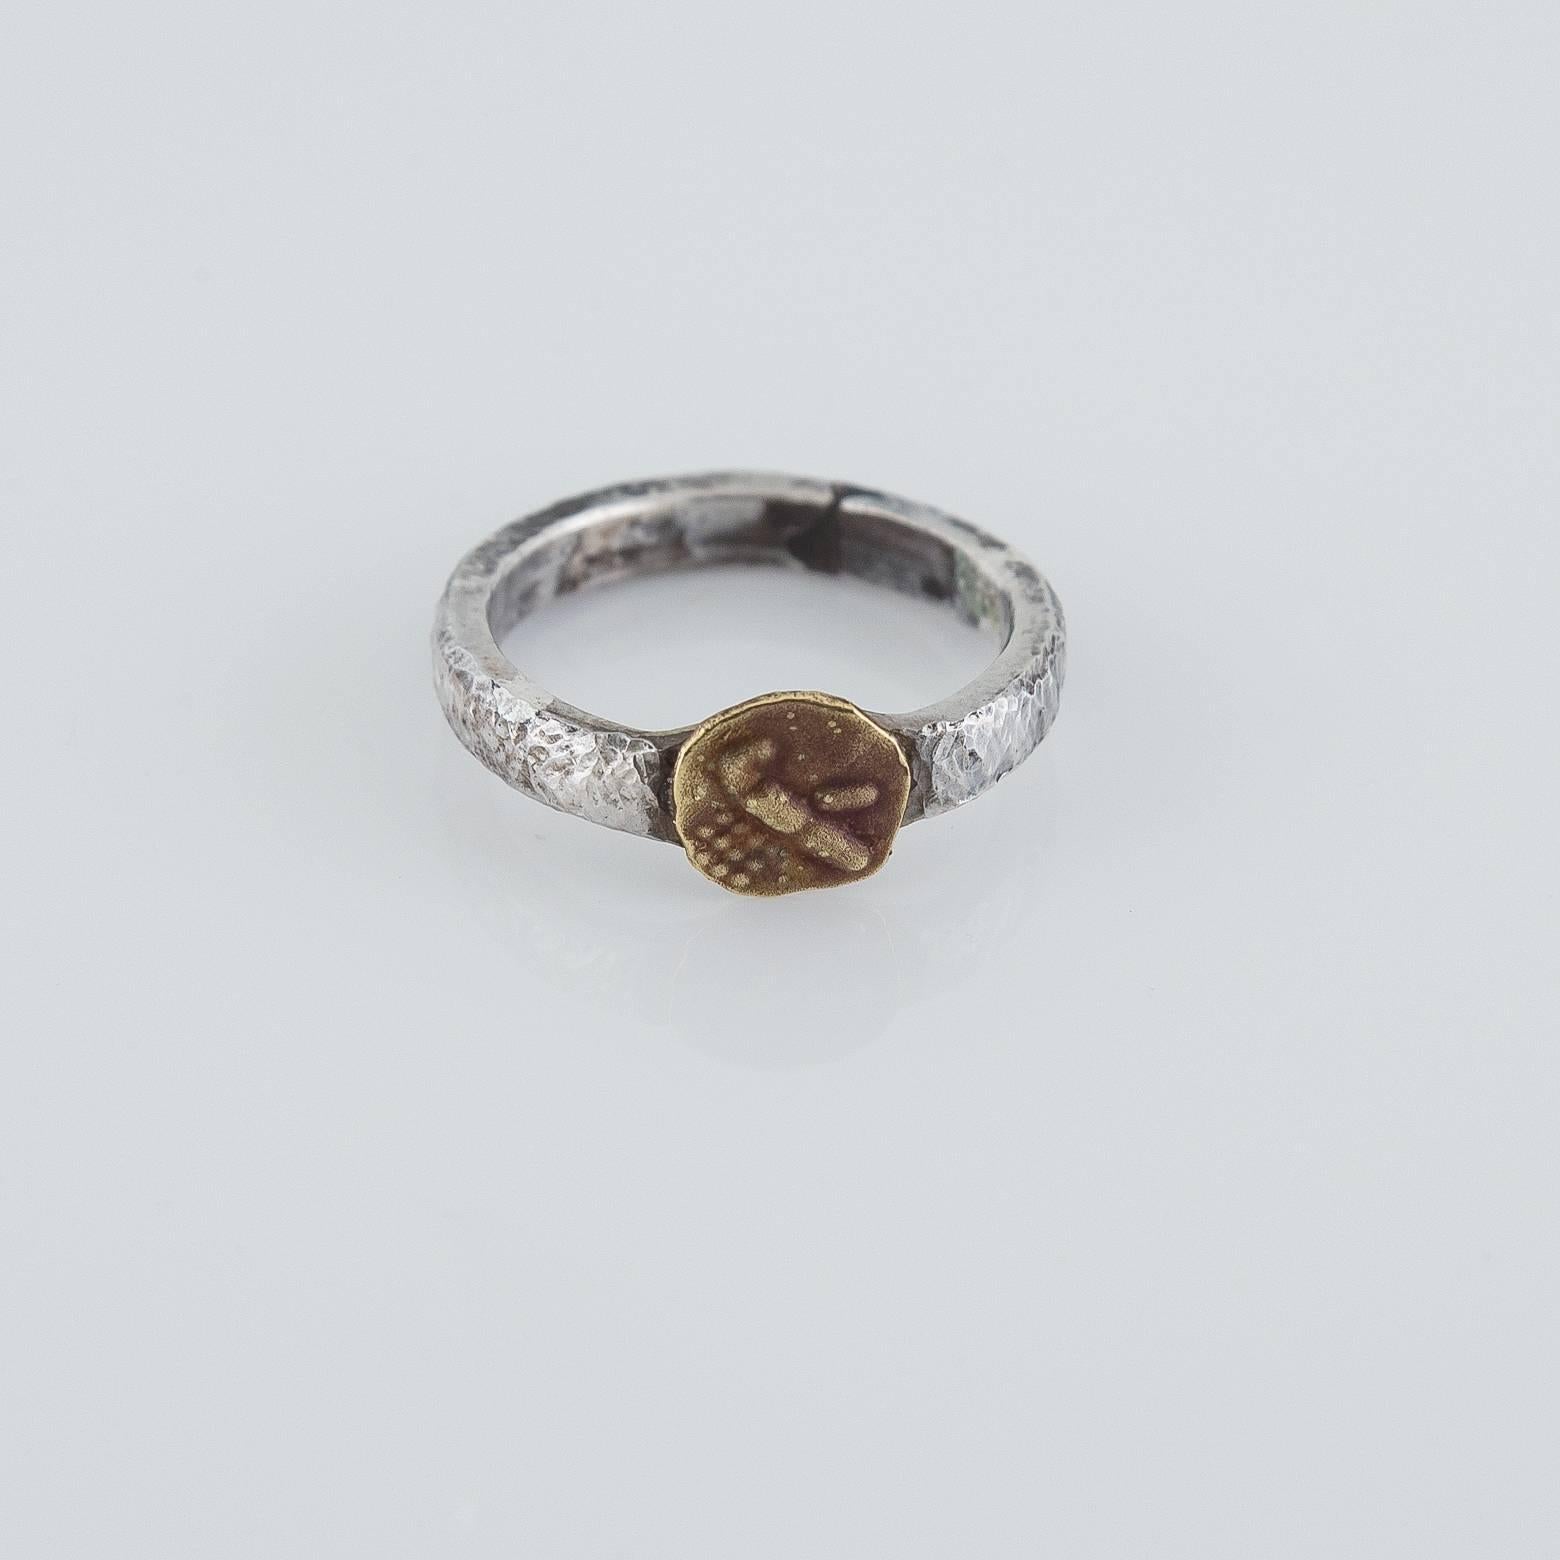 Handmade in our San Francisco Bay Area Studio this sterling silver band is hammered to create a unique almost woven texture with a stamped 14k yellow gold coin to sit on top. Fit for either sex and is a great stacking ring for added flare.This ring